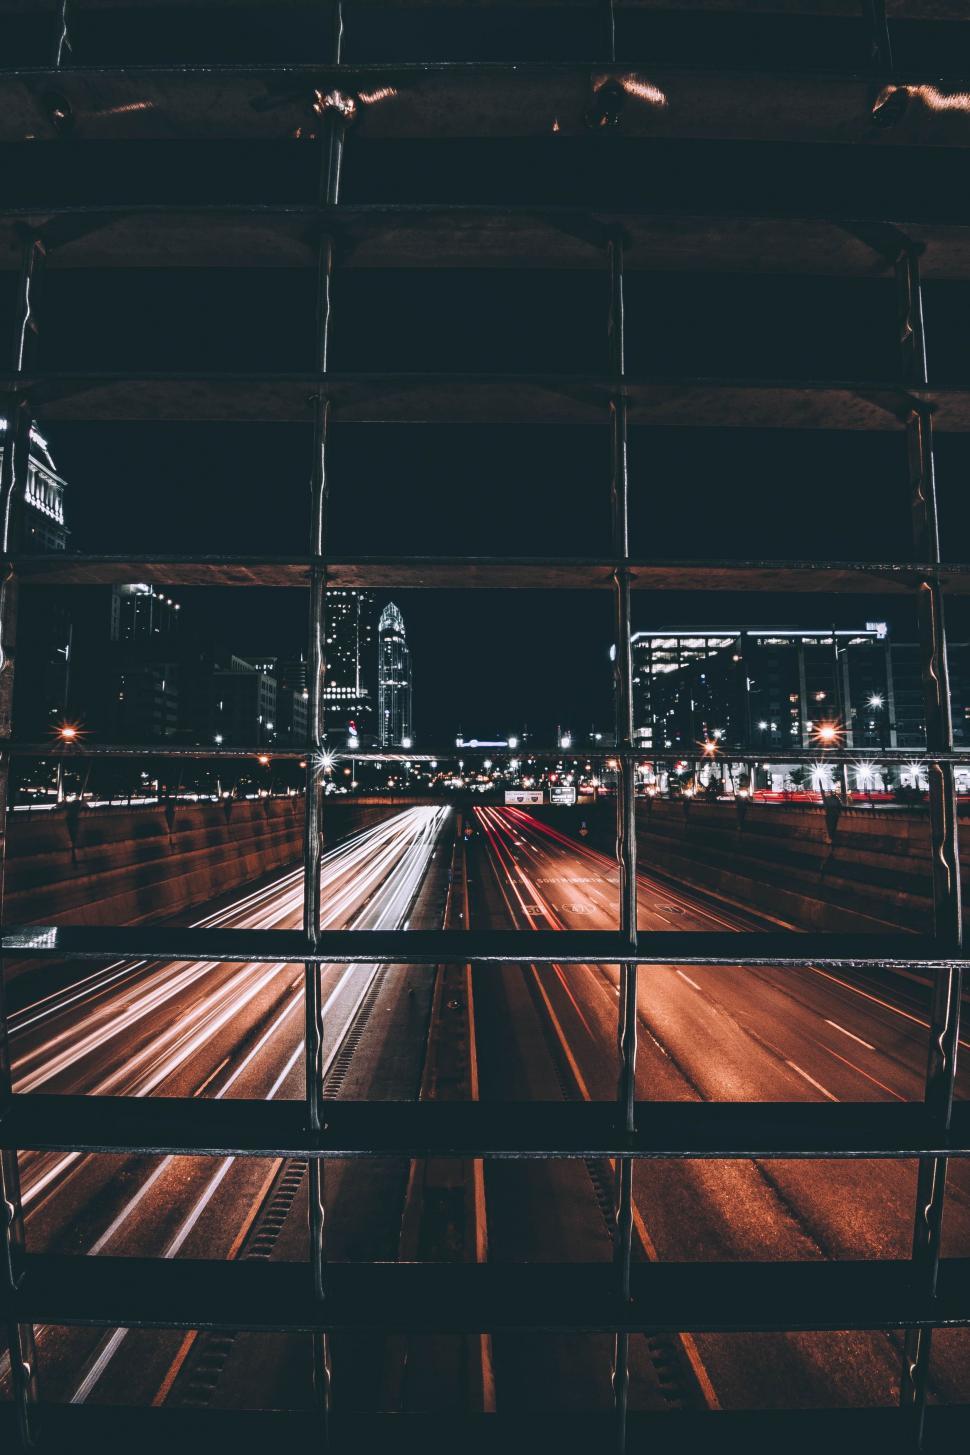 Free Image of City Street View Through Fence 